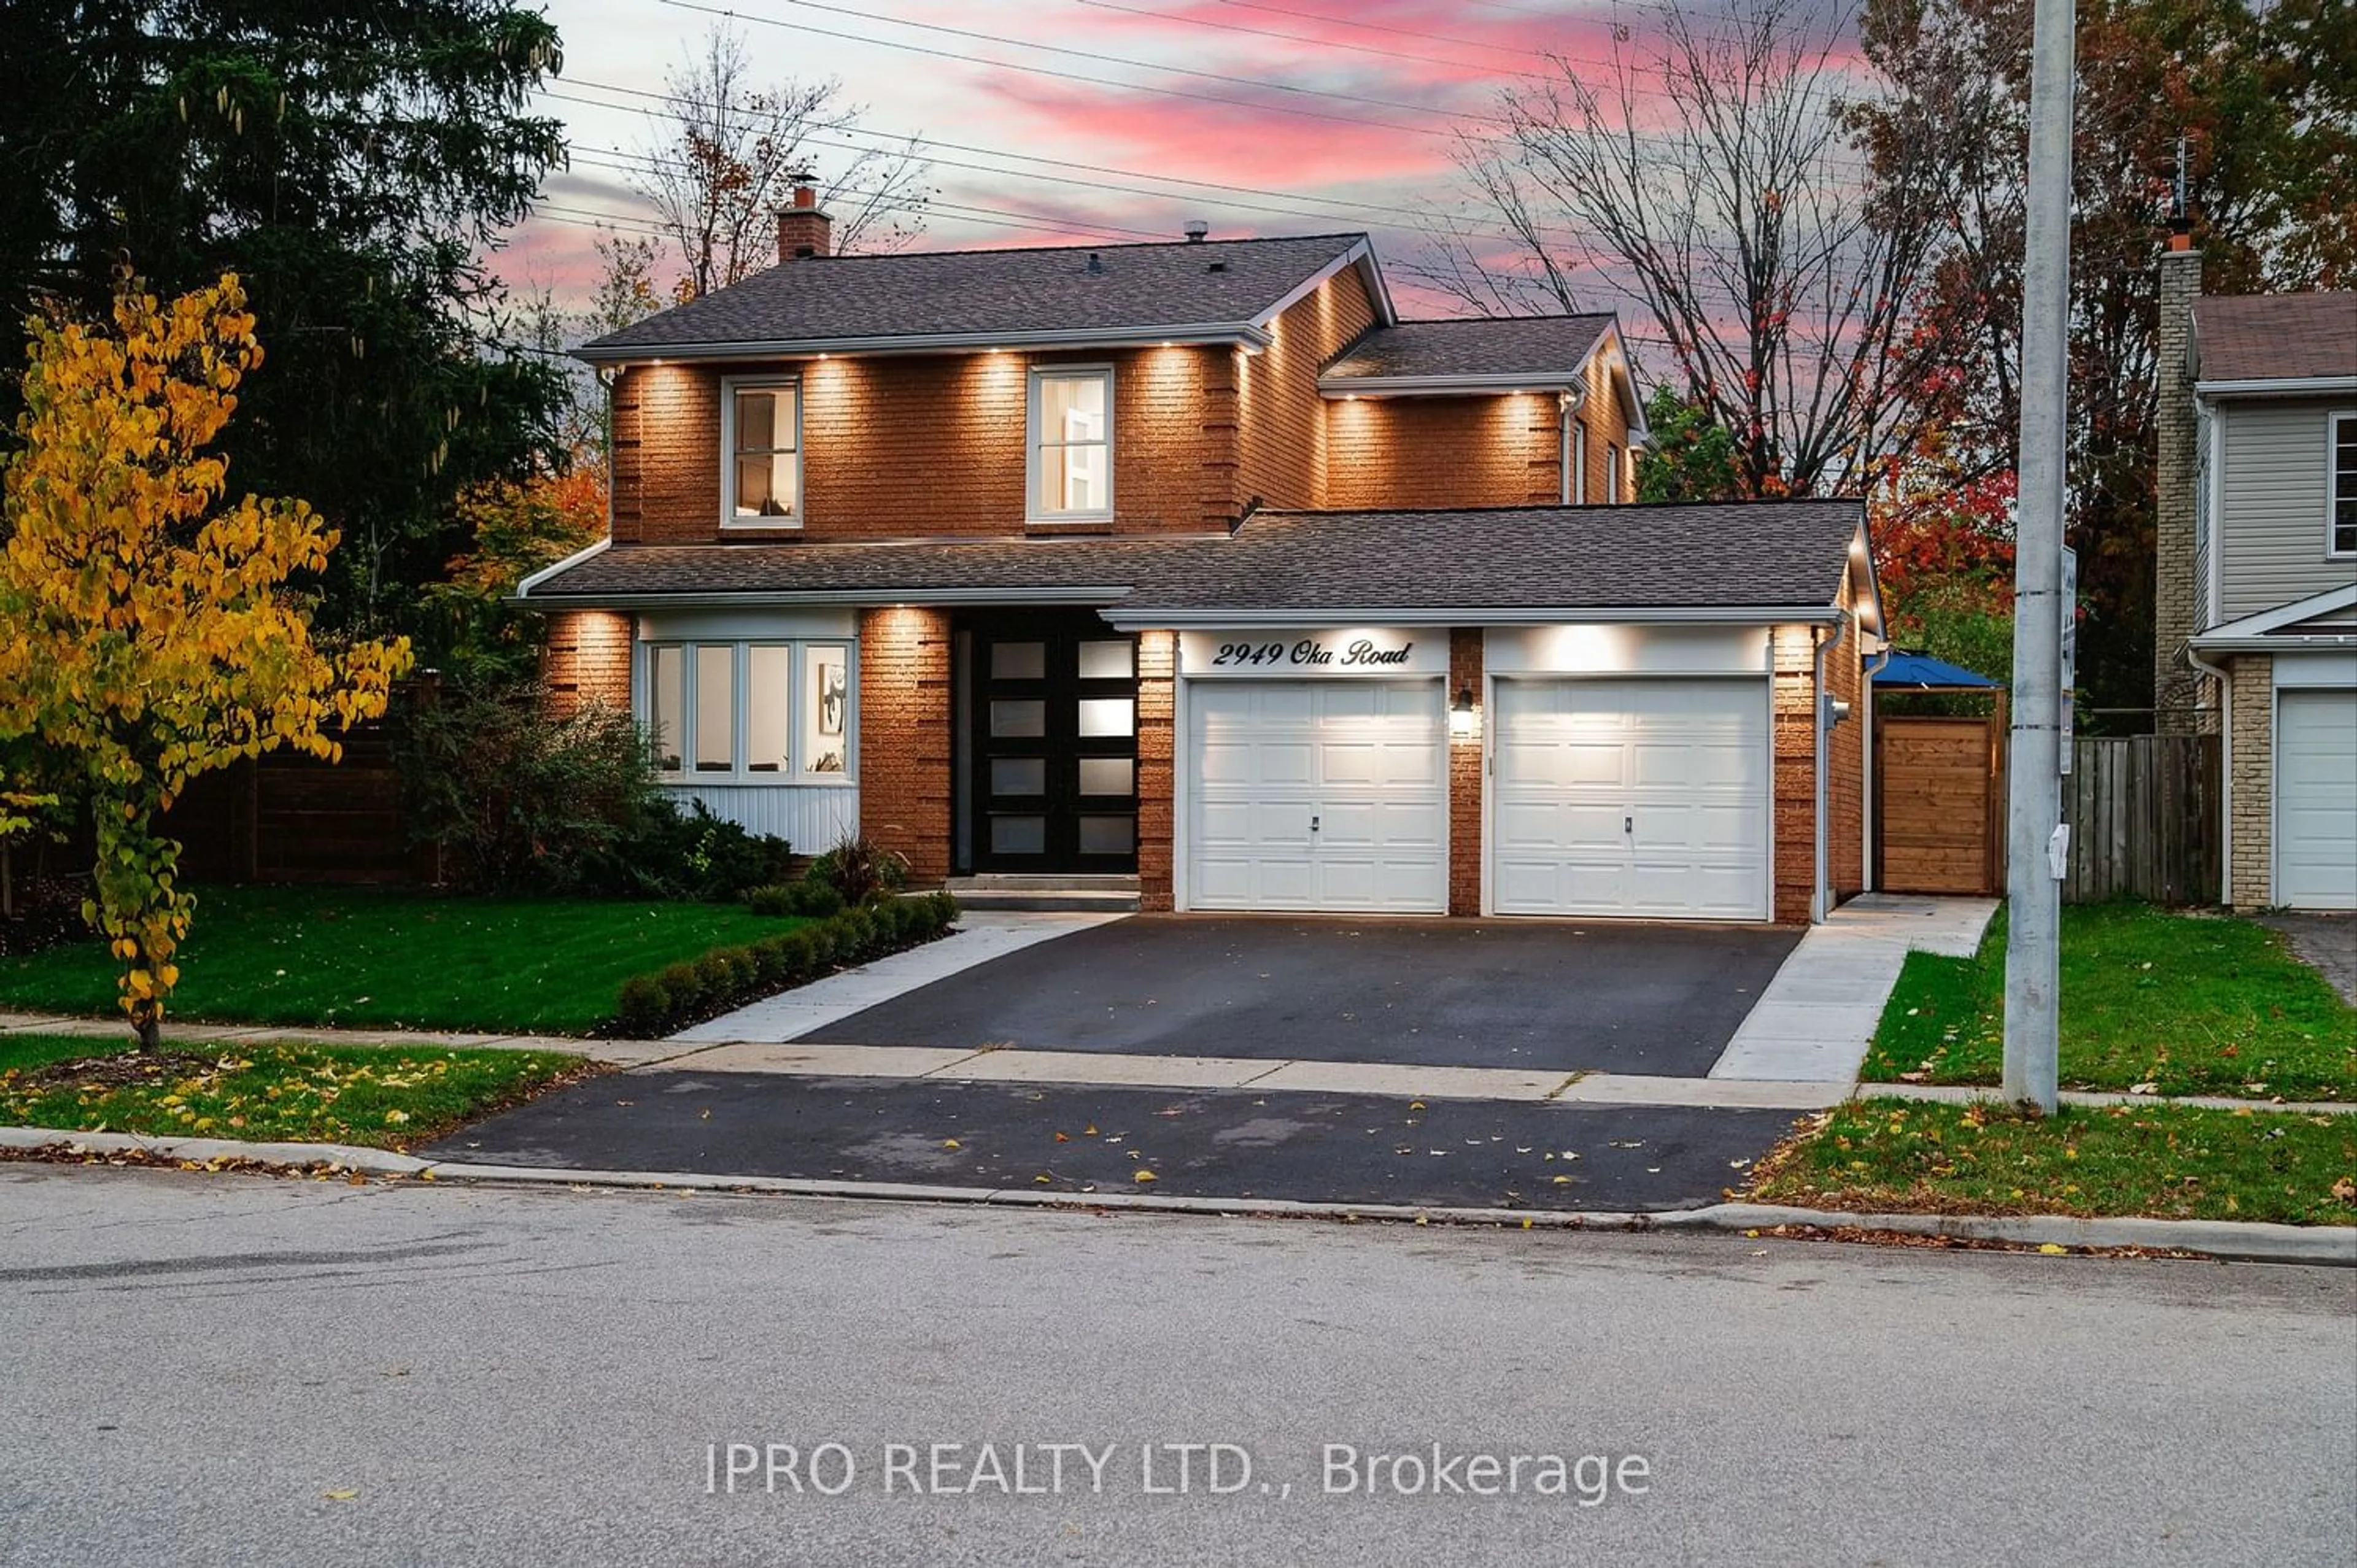 Home with brick exterior material for 2949 Oka Rd, Mississauga Ontario L5N 1W8